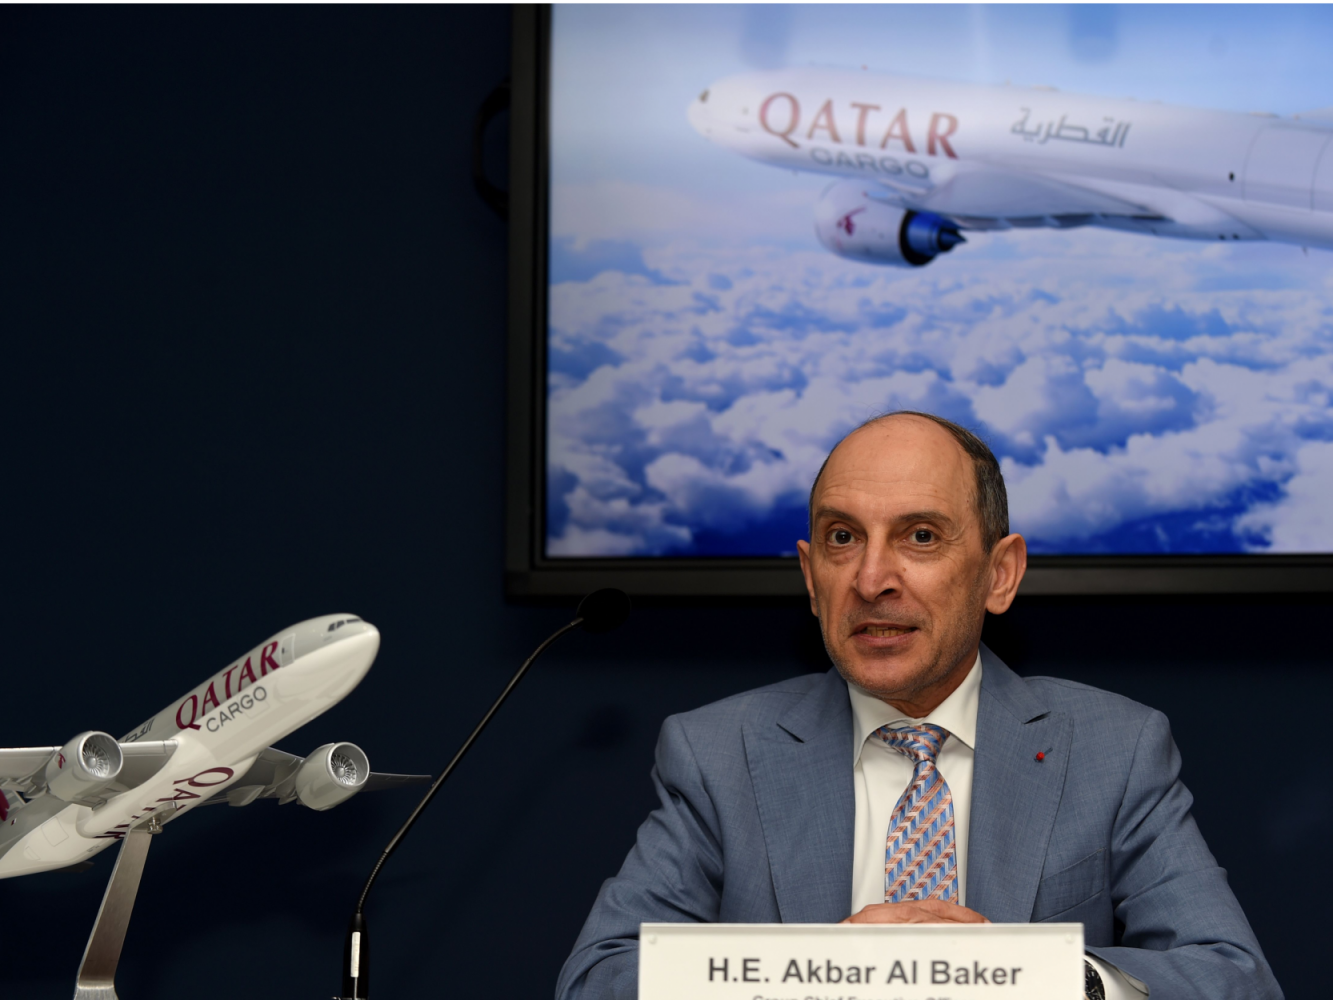 Al Baker: We hope to reach an agreement with Boeing and Airbus